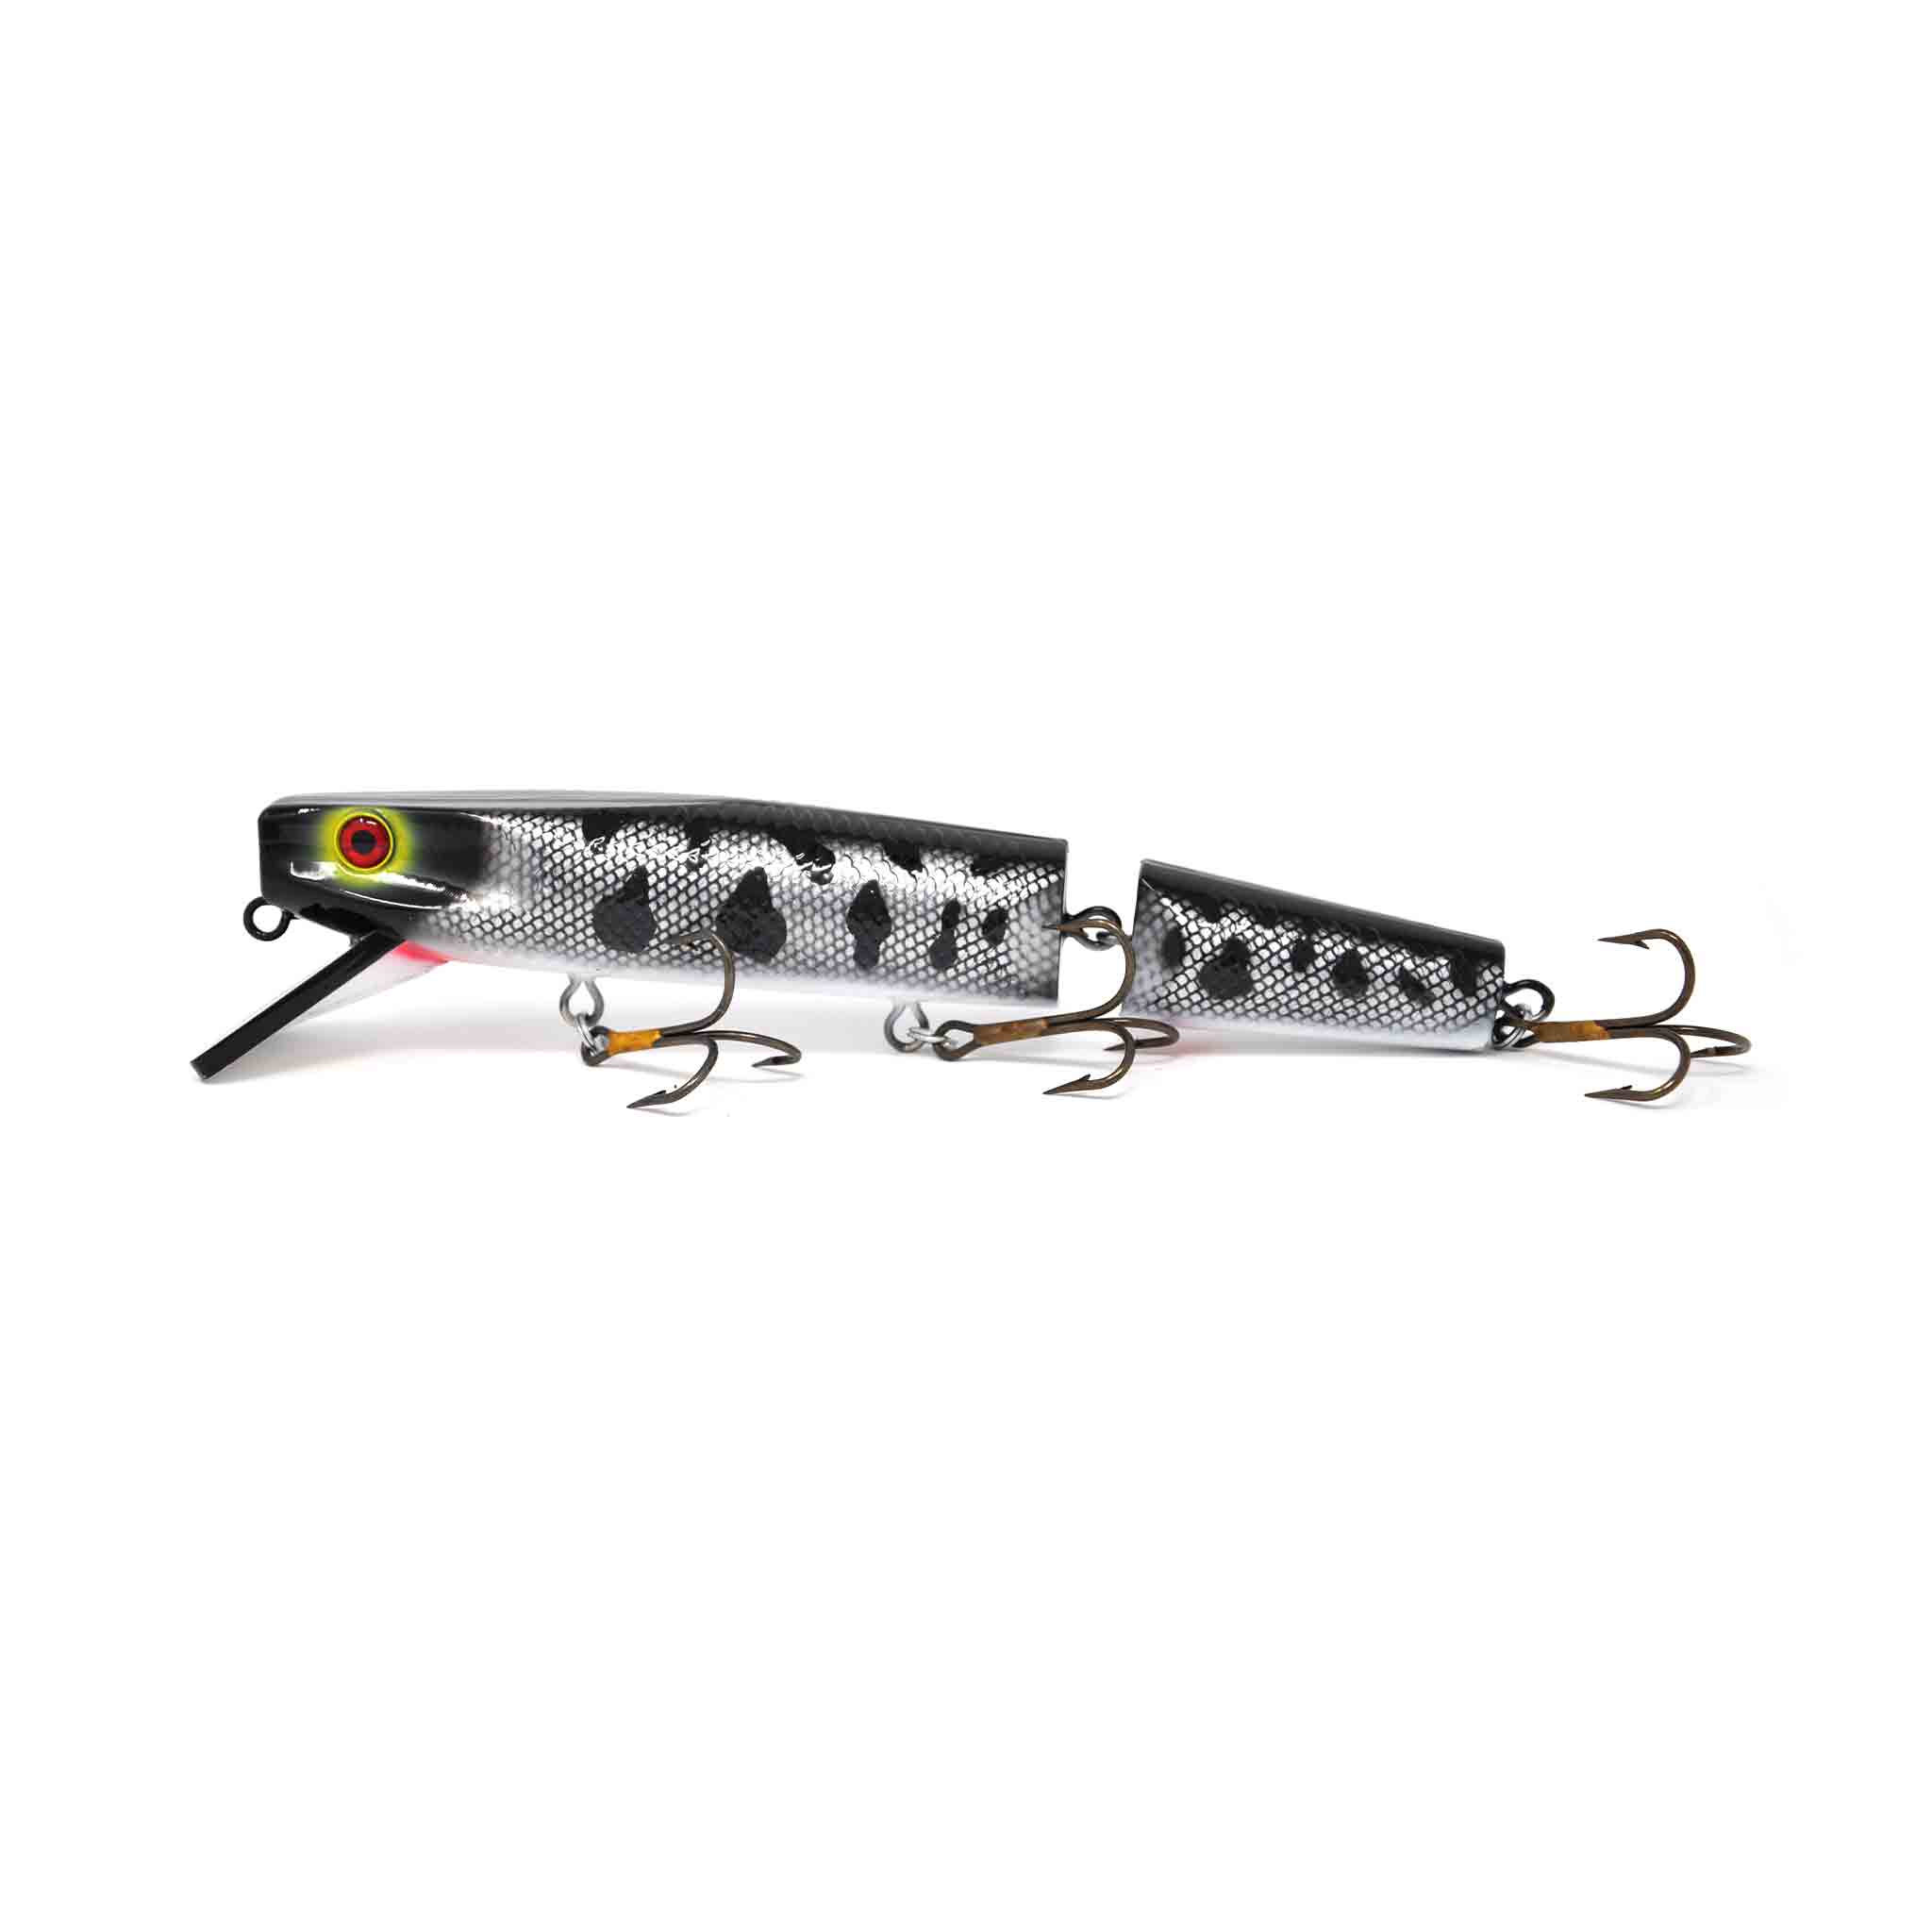 Fishing Lure 6 Jointed, Hard Jointed Fishing Lures